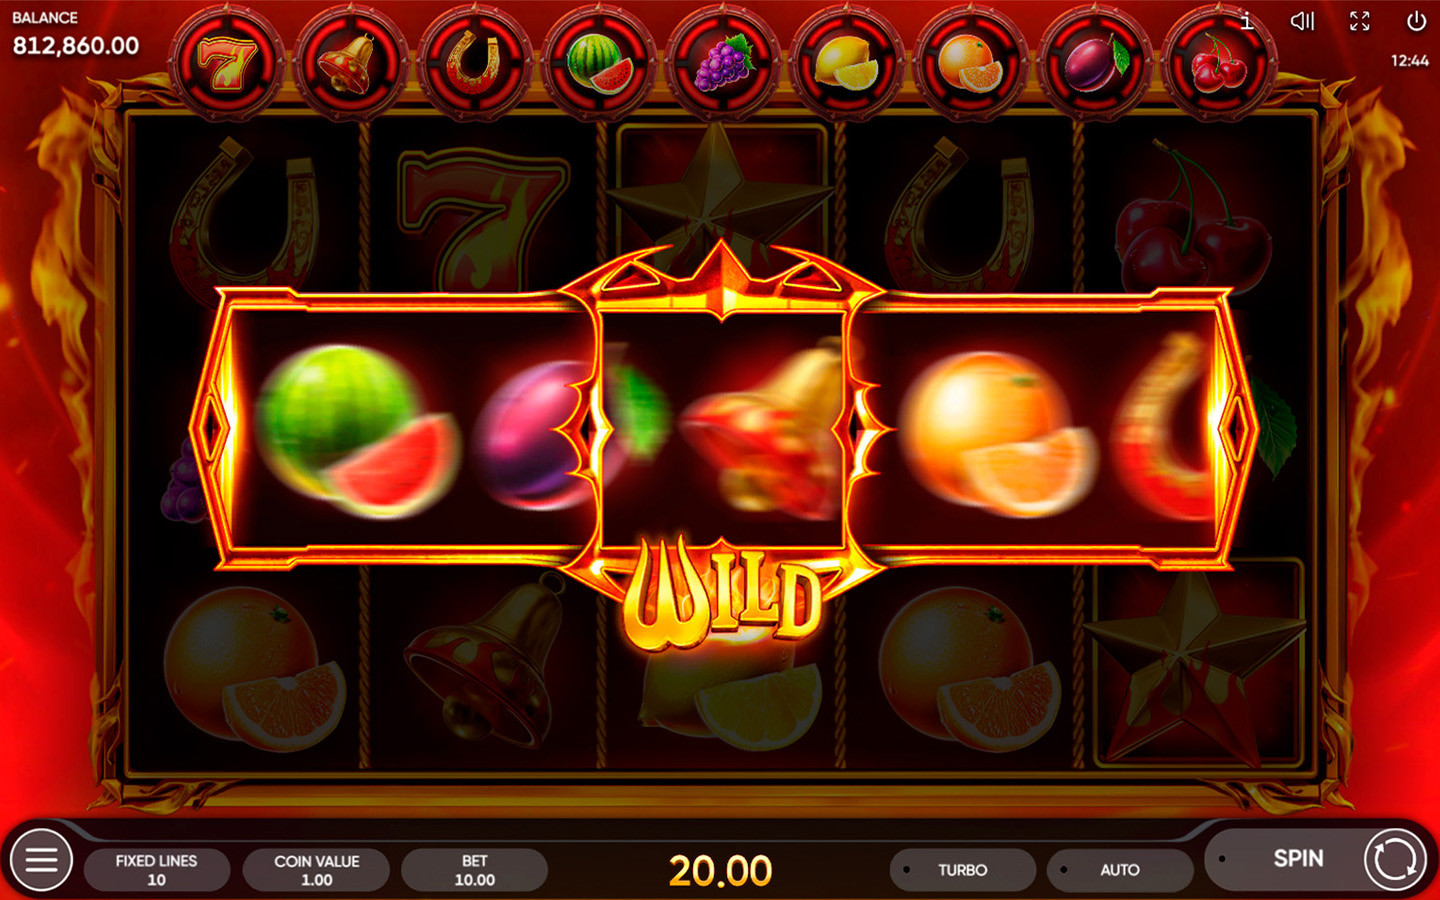 CLASSIC SLOT GAMES PROVIDER | New gambling software launched!